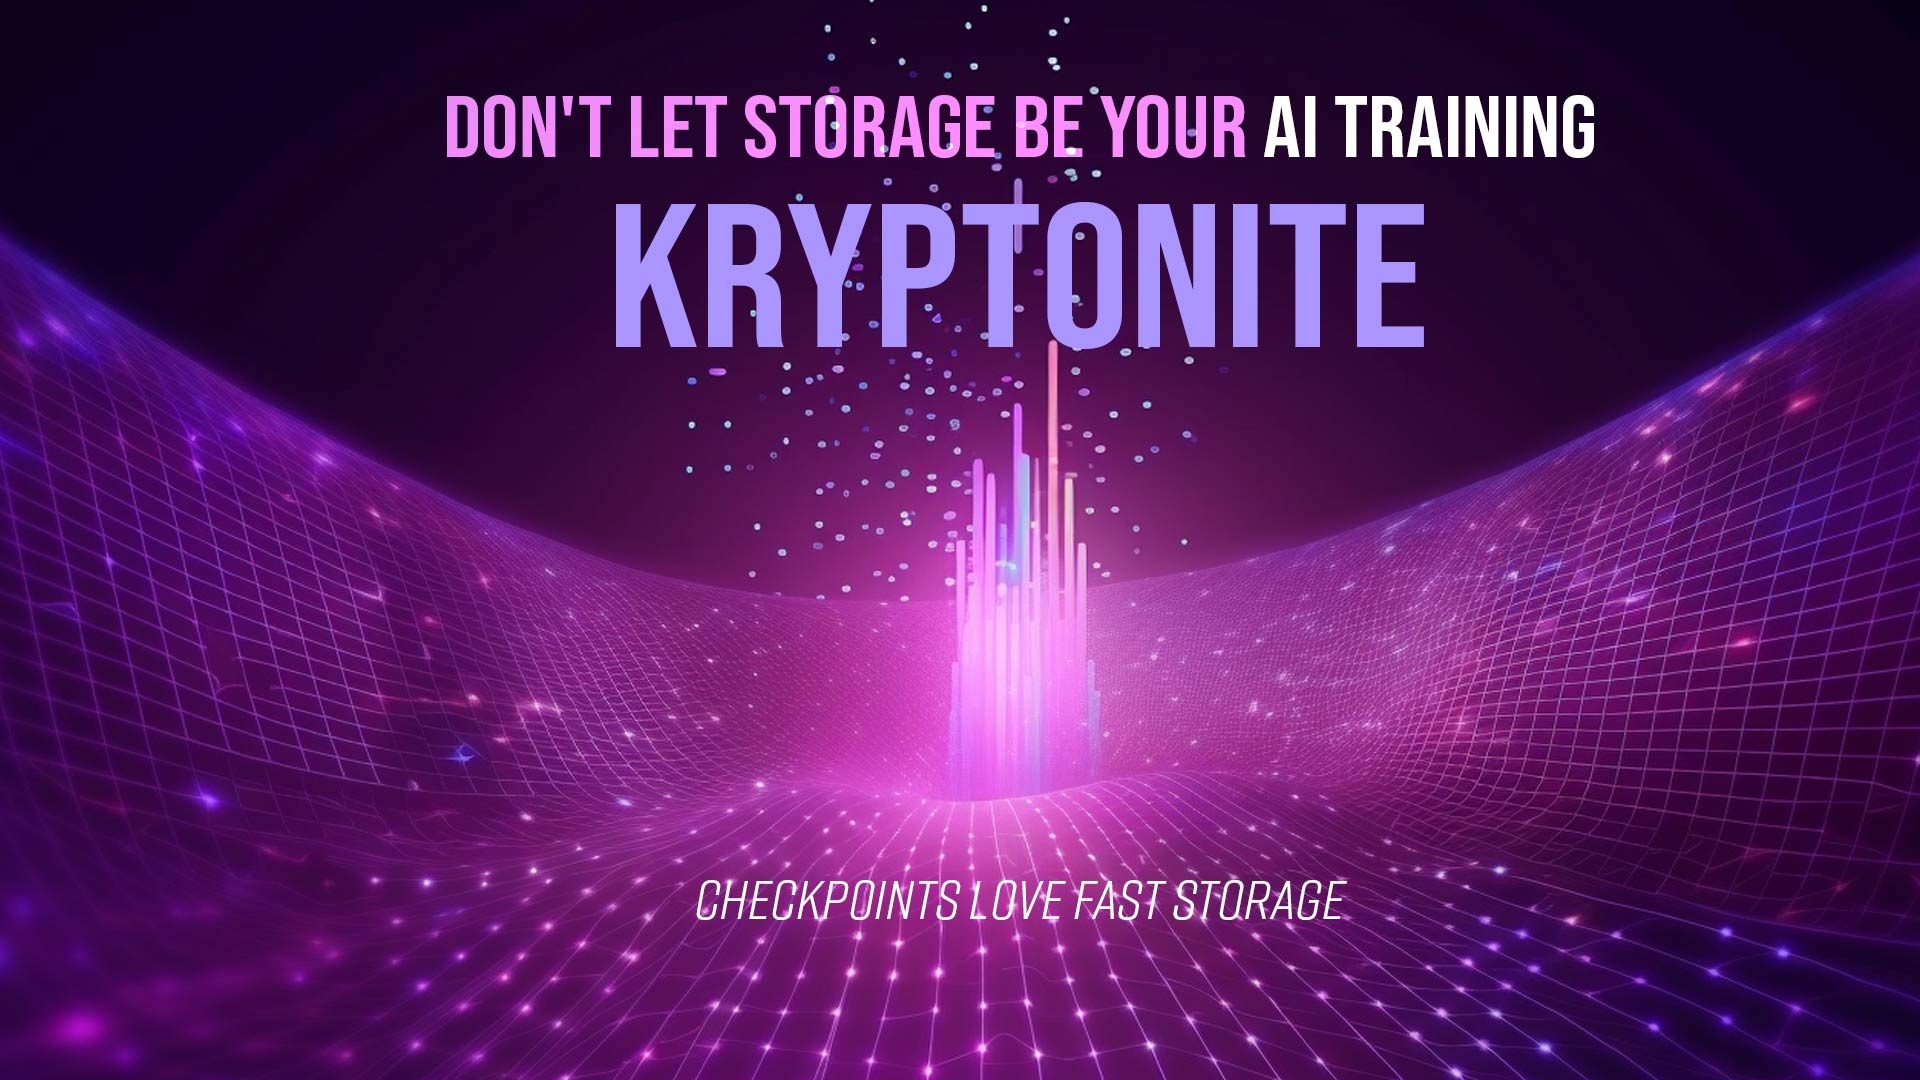 Don't Let Storage Be Your AI Training Kryptonite